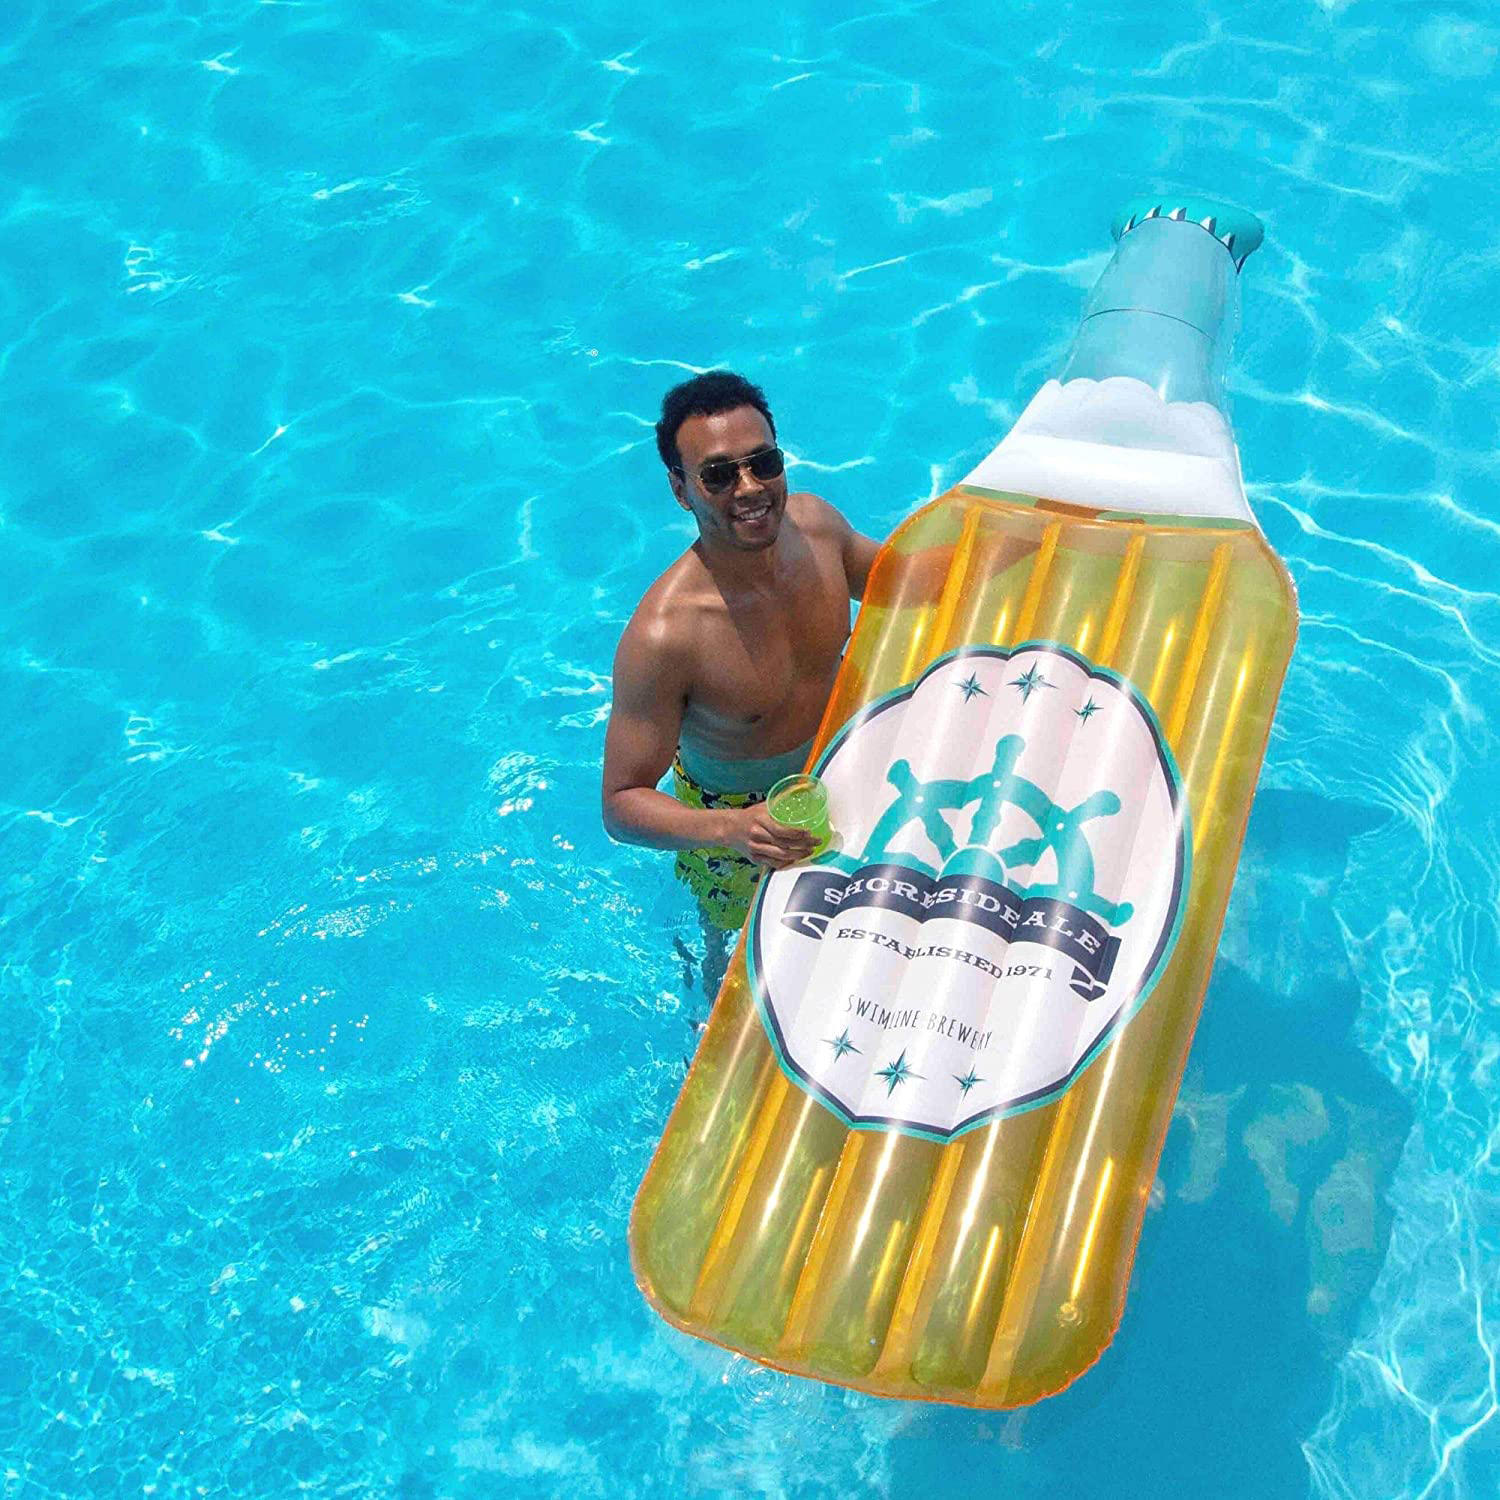 wine bottle pool floats for adults